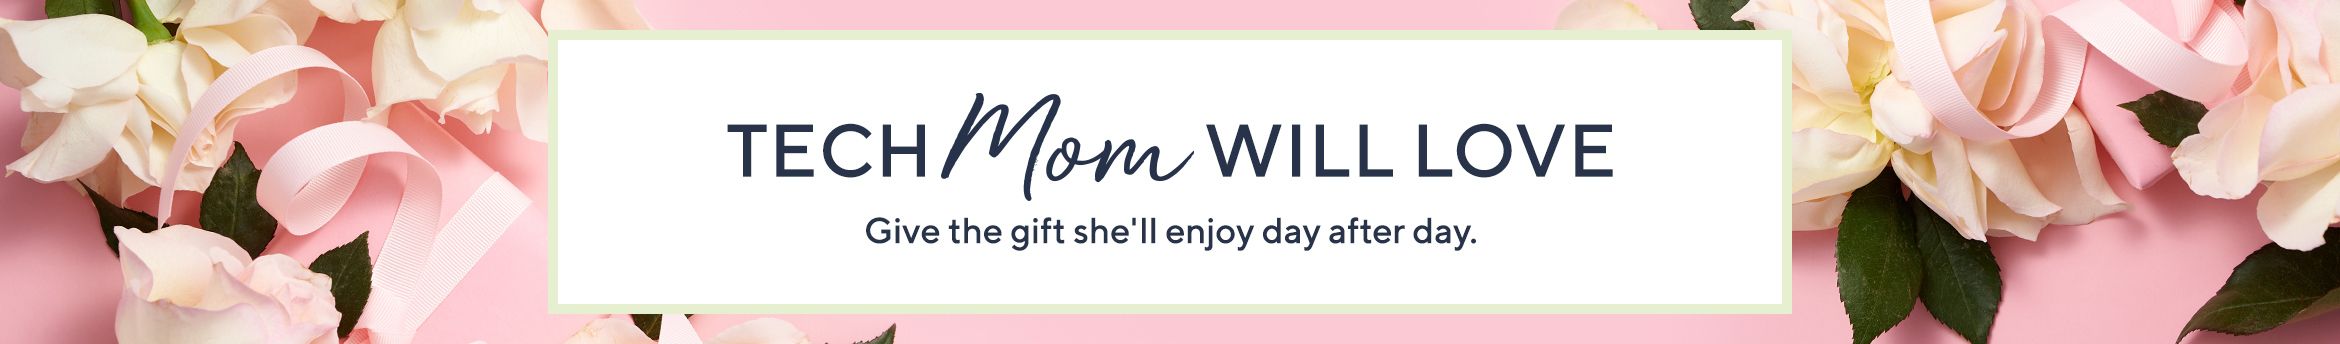 Tech Mom Will Love.  Give the gift she'll enjoy day after day.